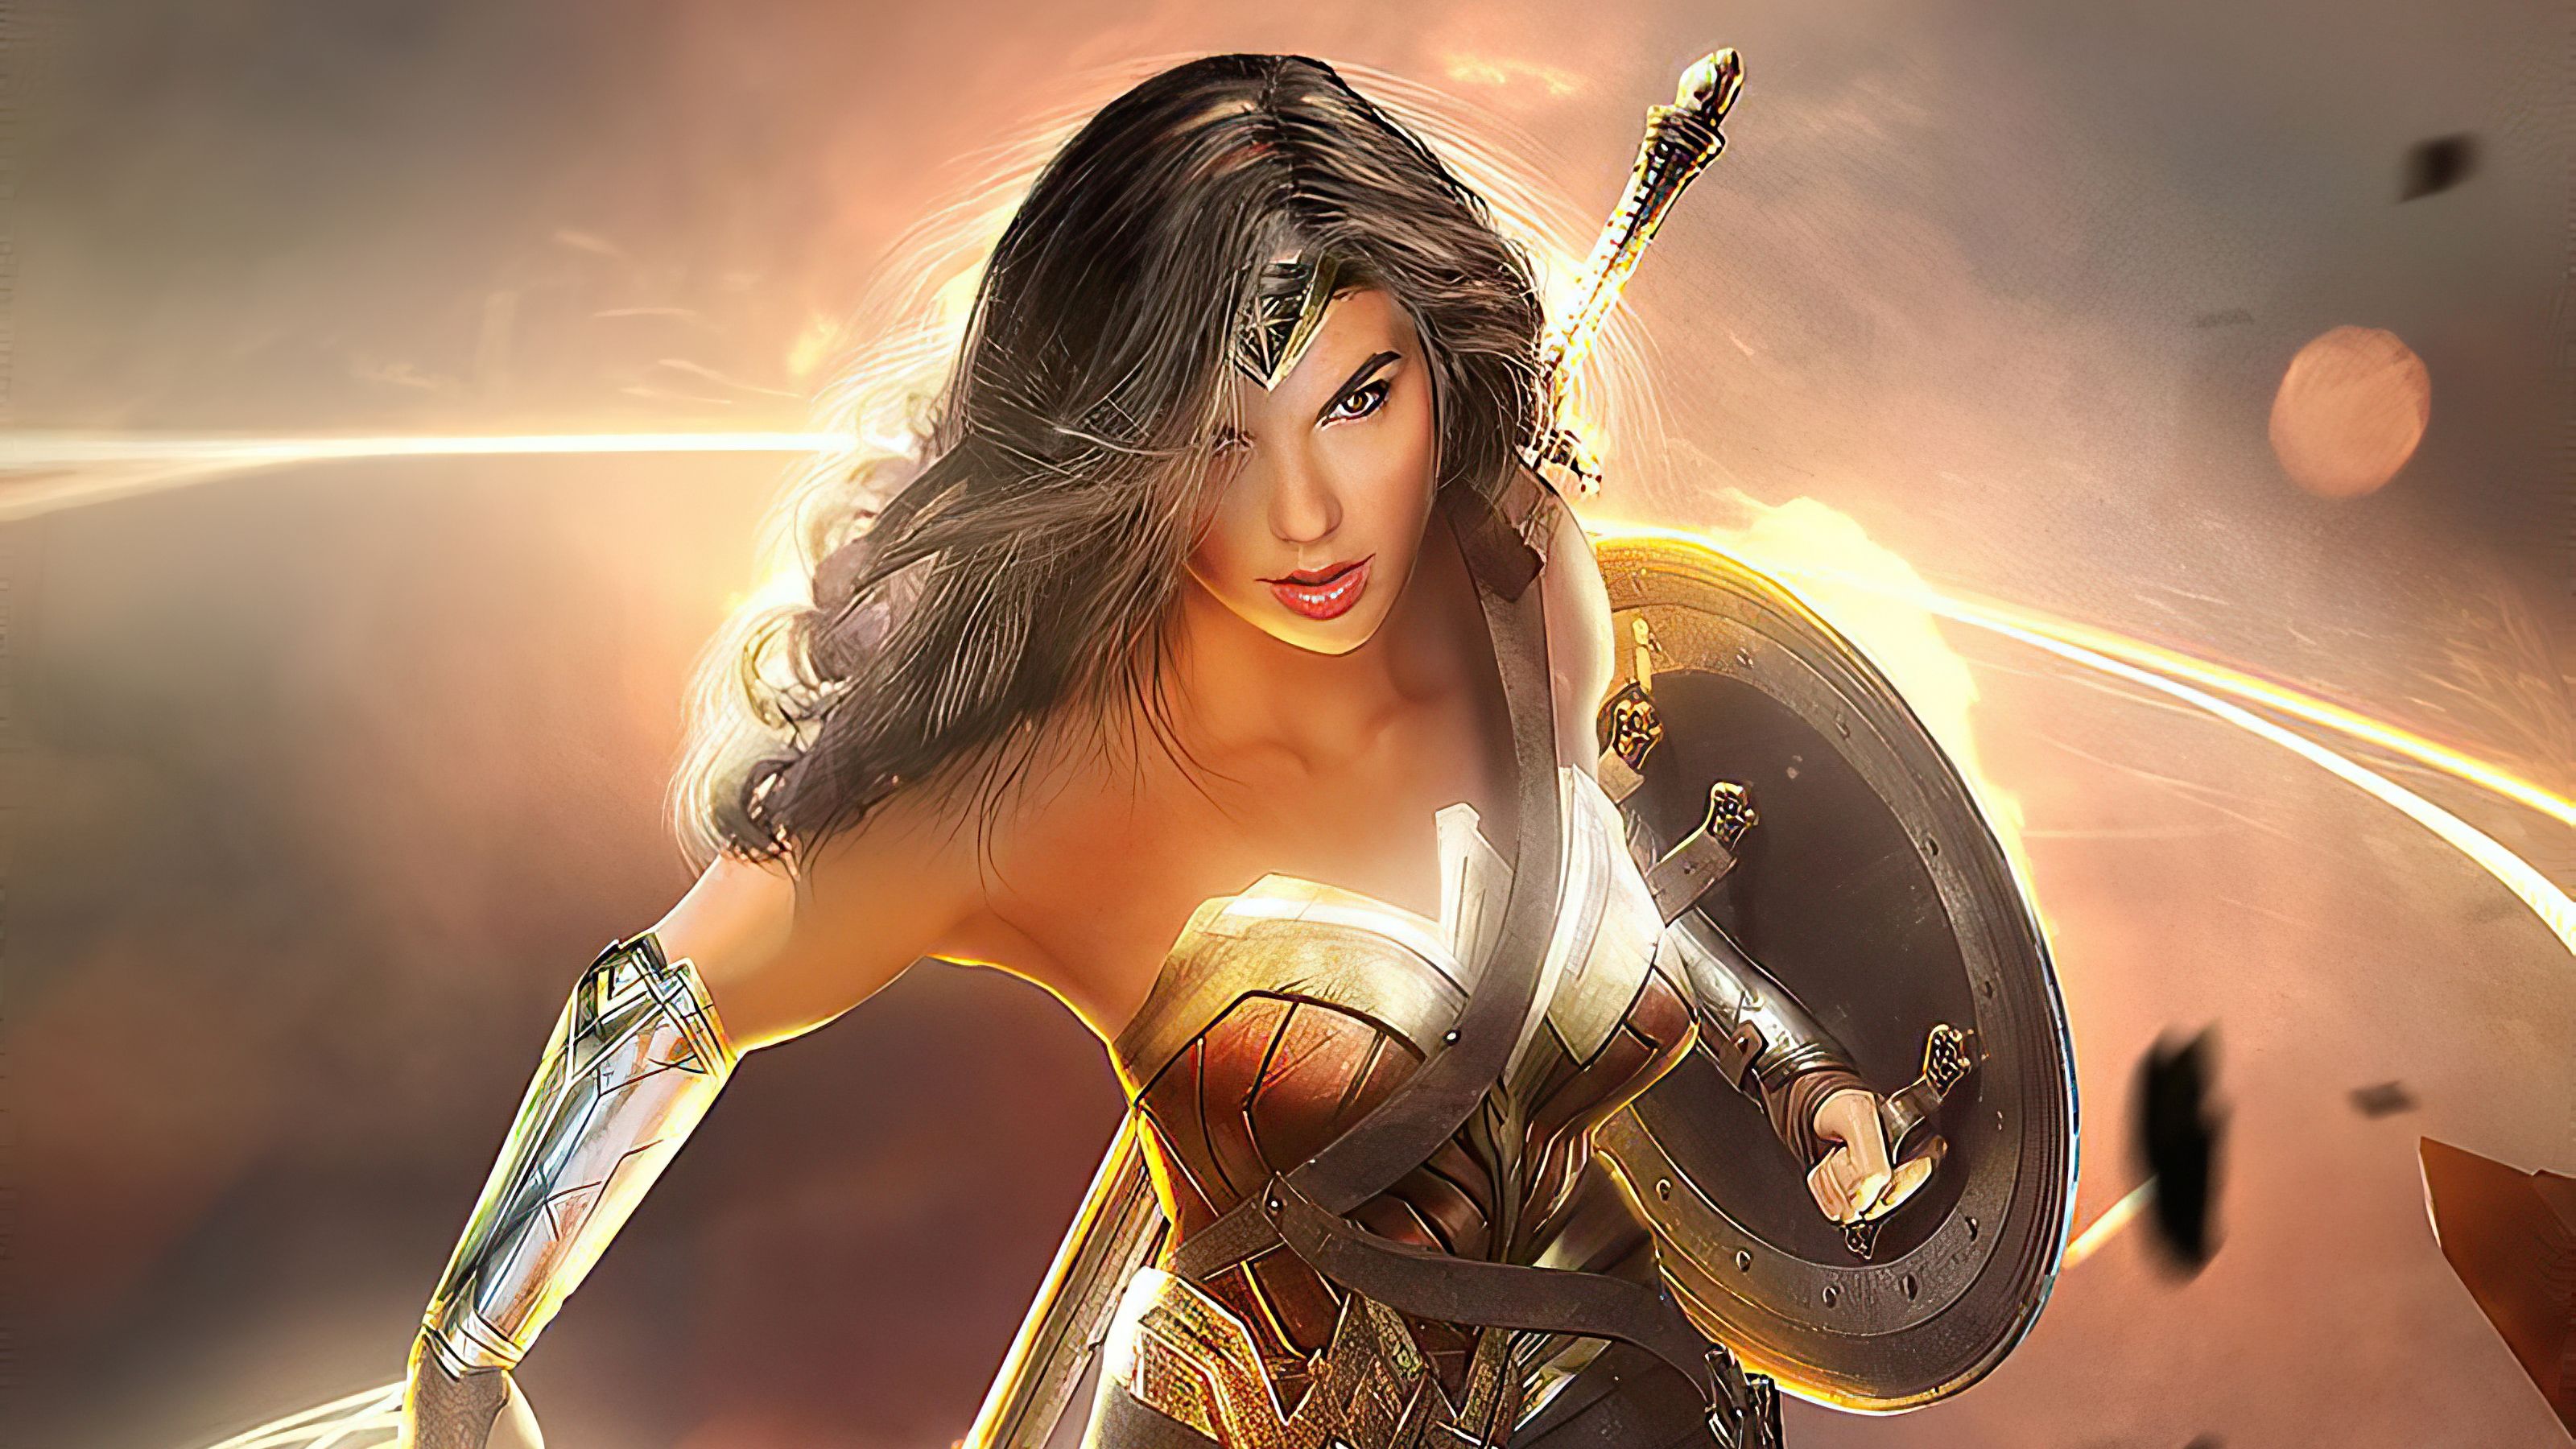 30 Wonder woman HD Wallpapers & Backgrounds